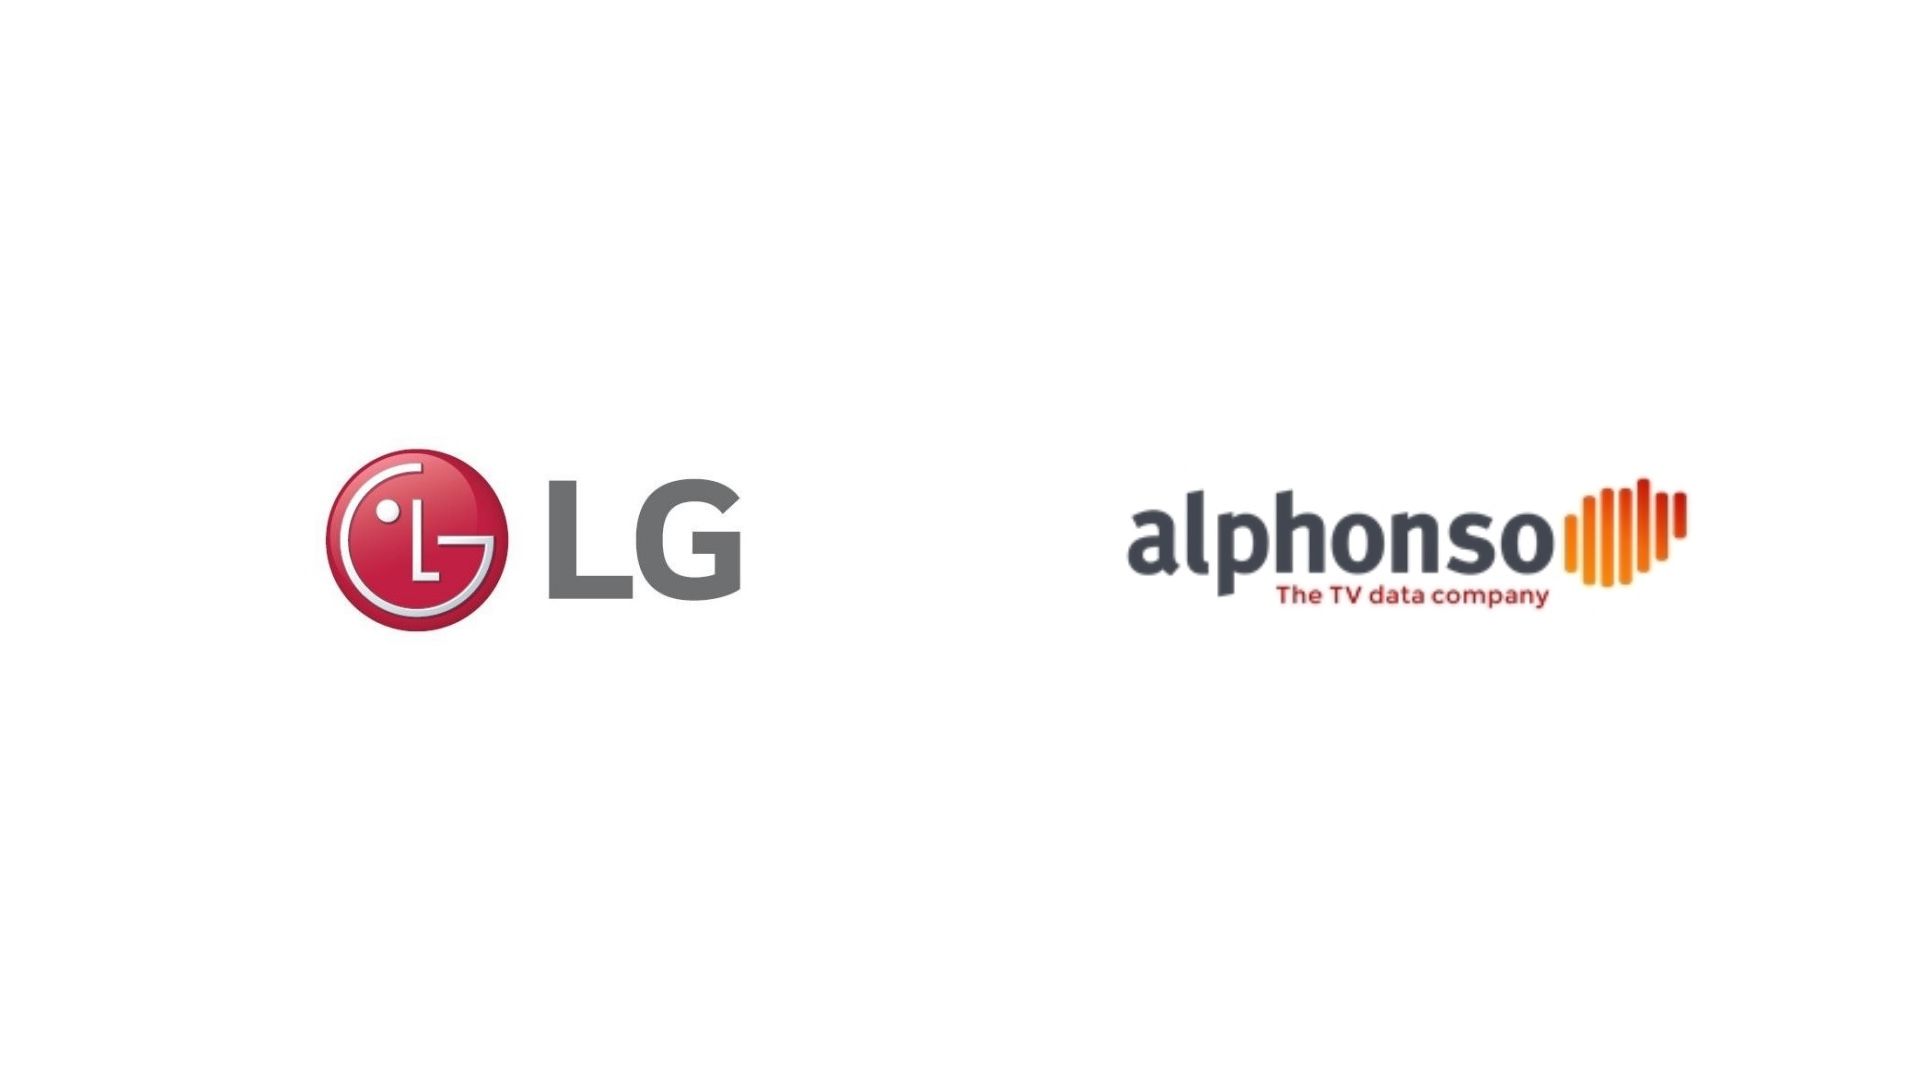 LG to acquire more than 50 percent of Alphonso, to enter in the Connected TV ad market